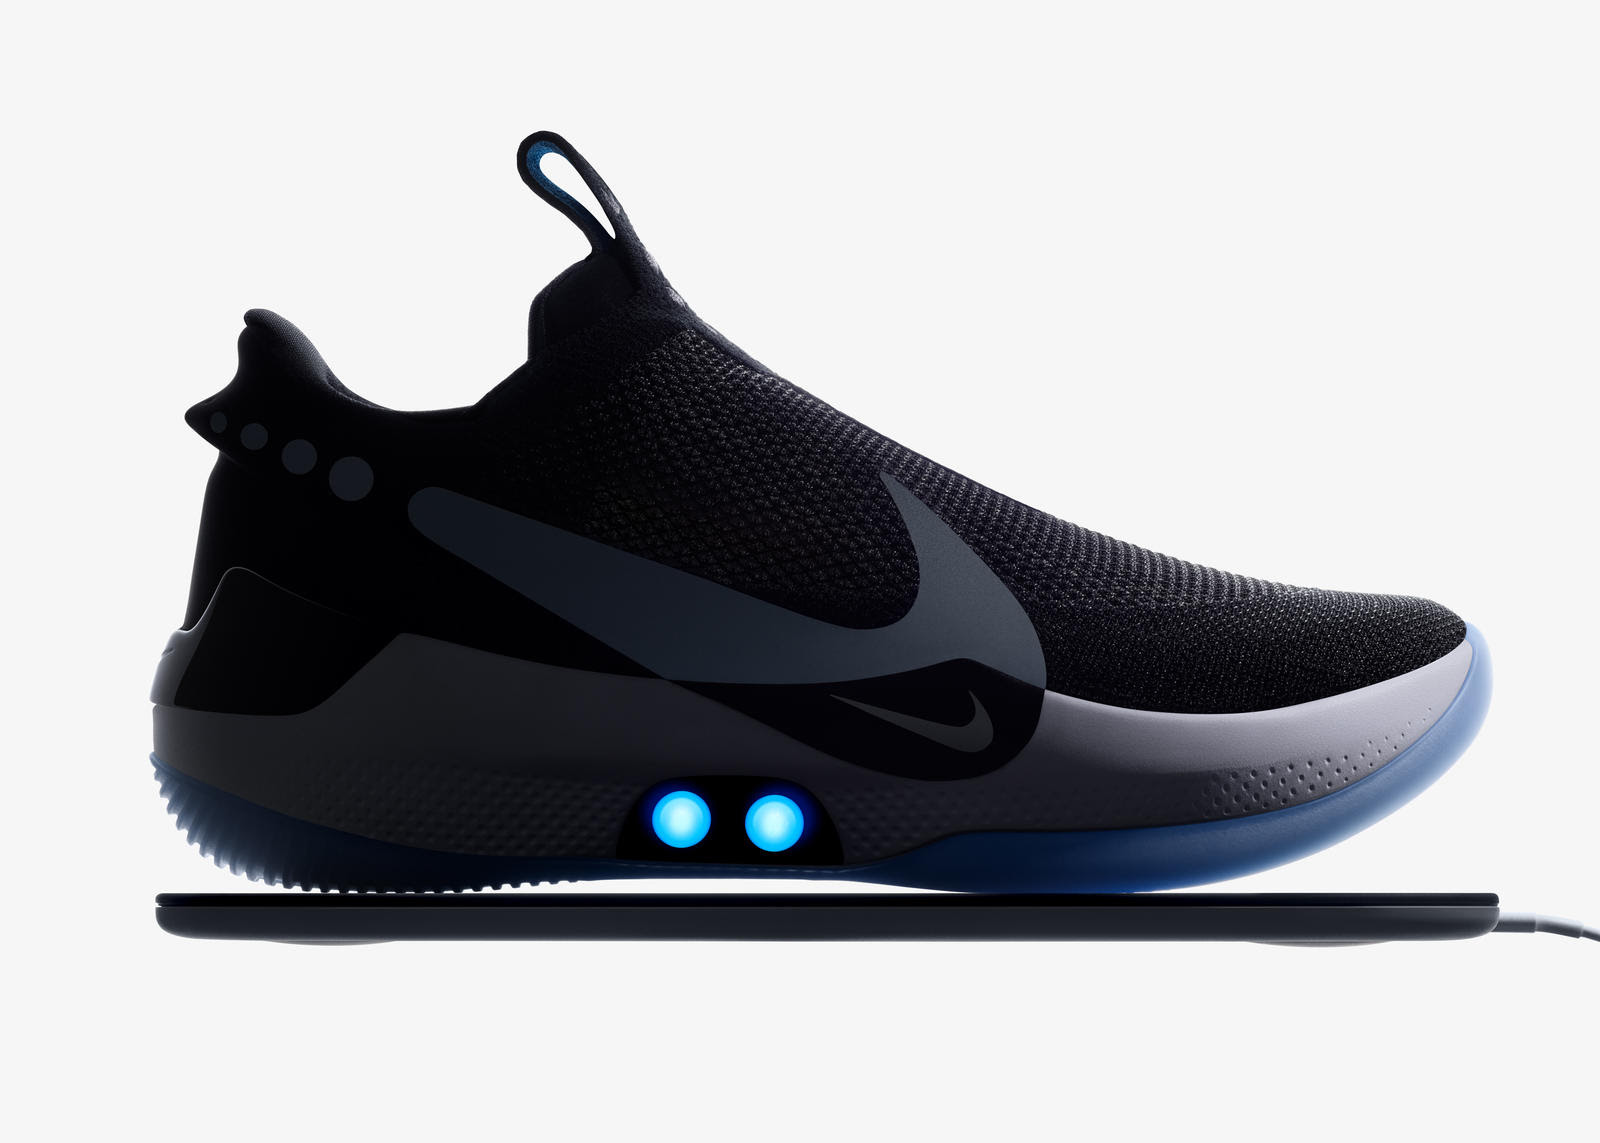 Continuo Limpiamente templado Nike New Smart Sneaker Adept to Track Real-Time Sport Performance -  Bloomberg